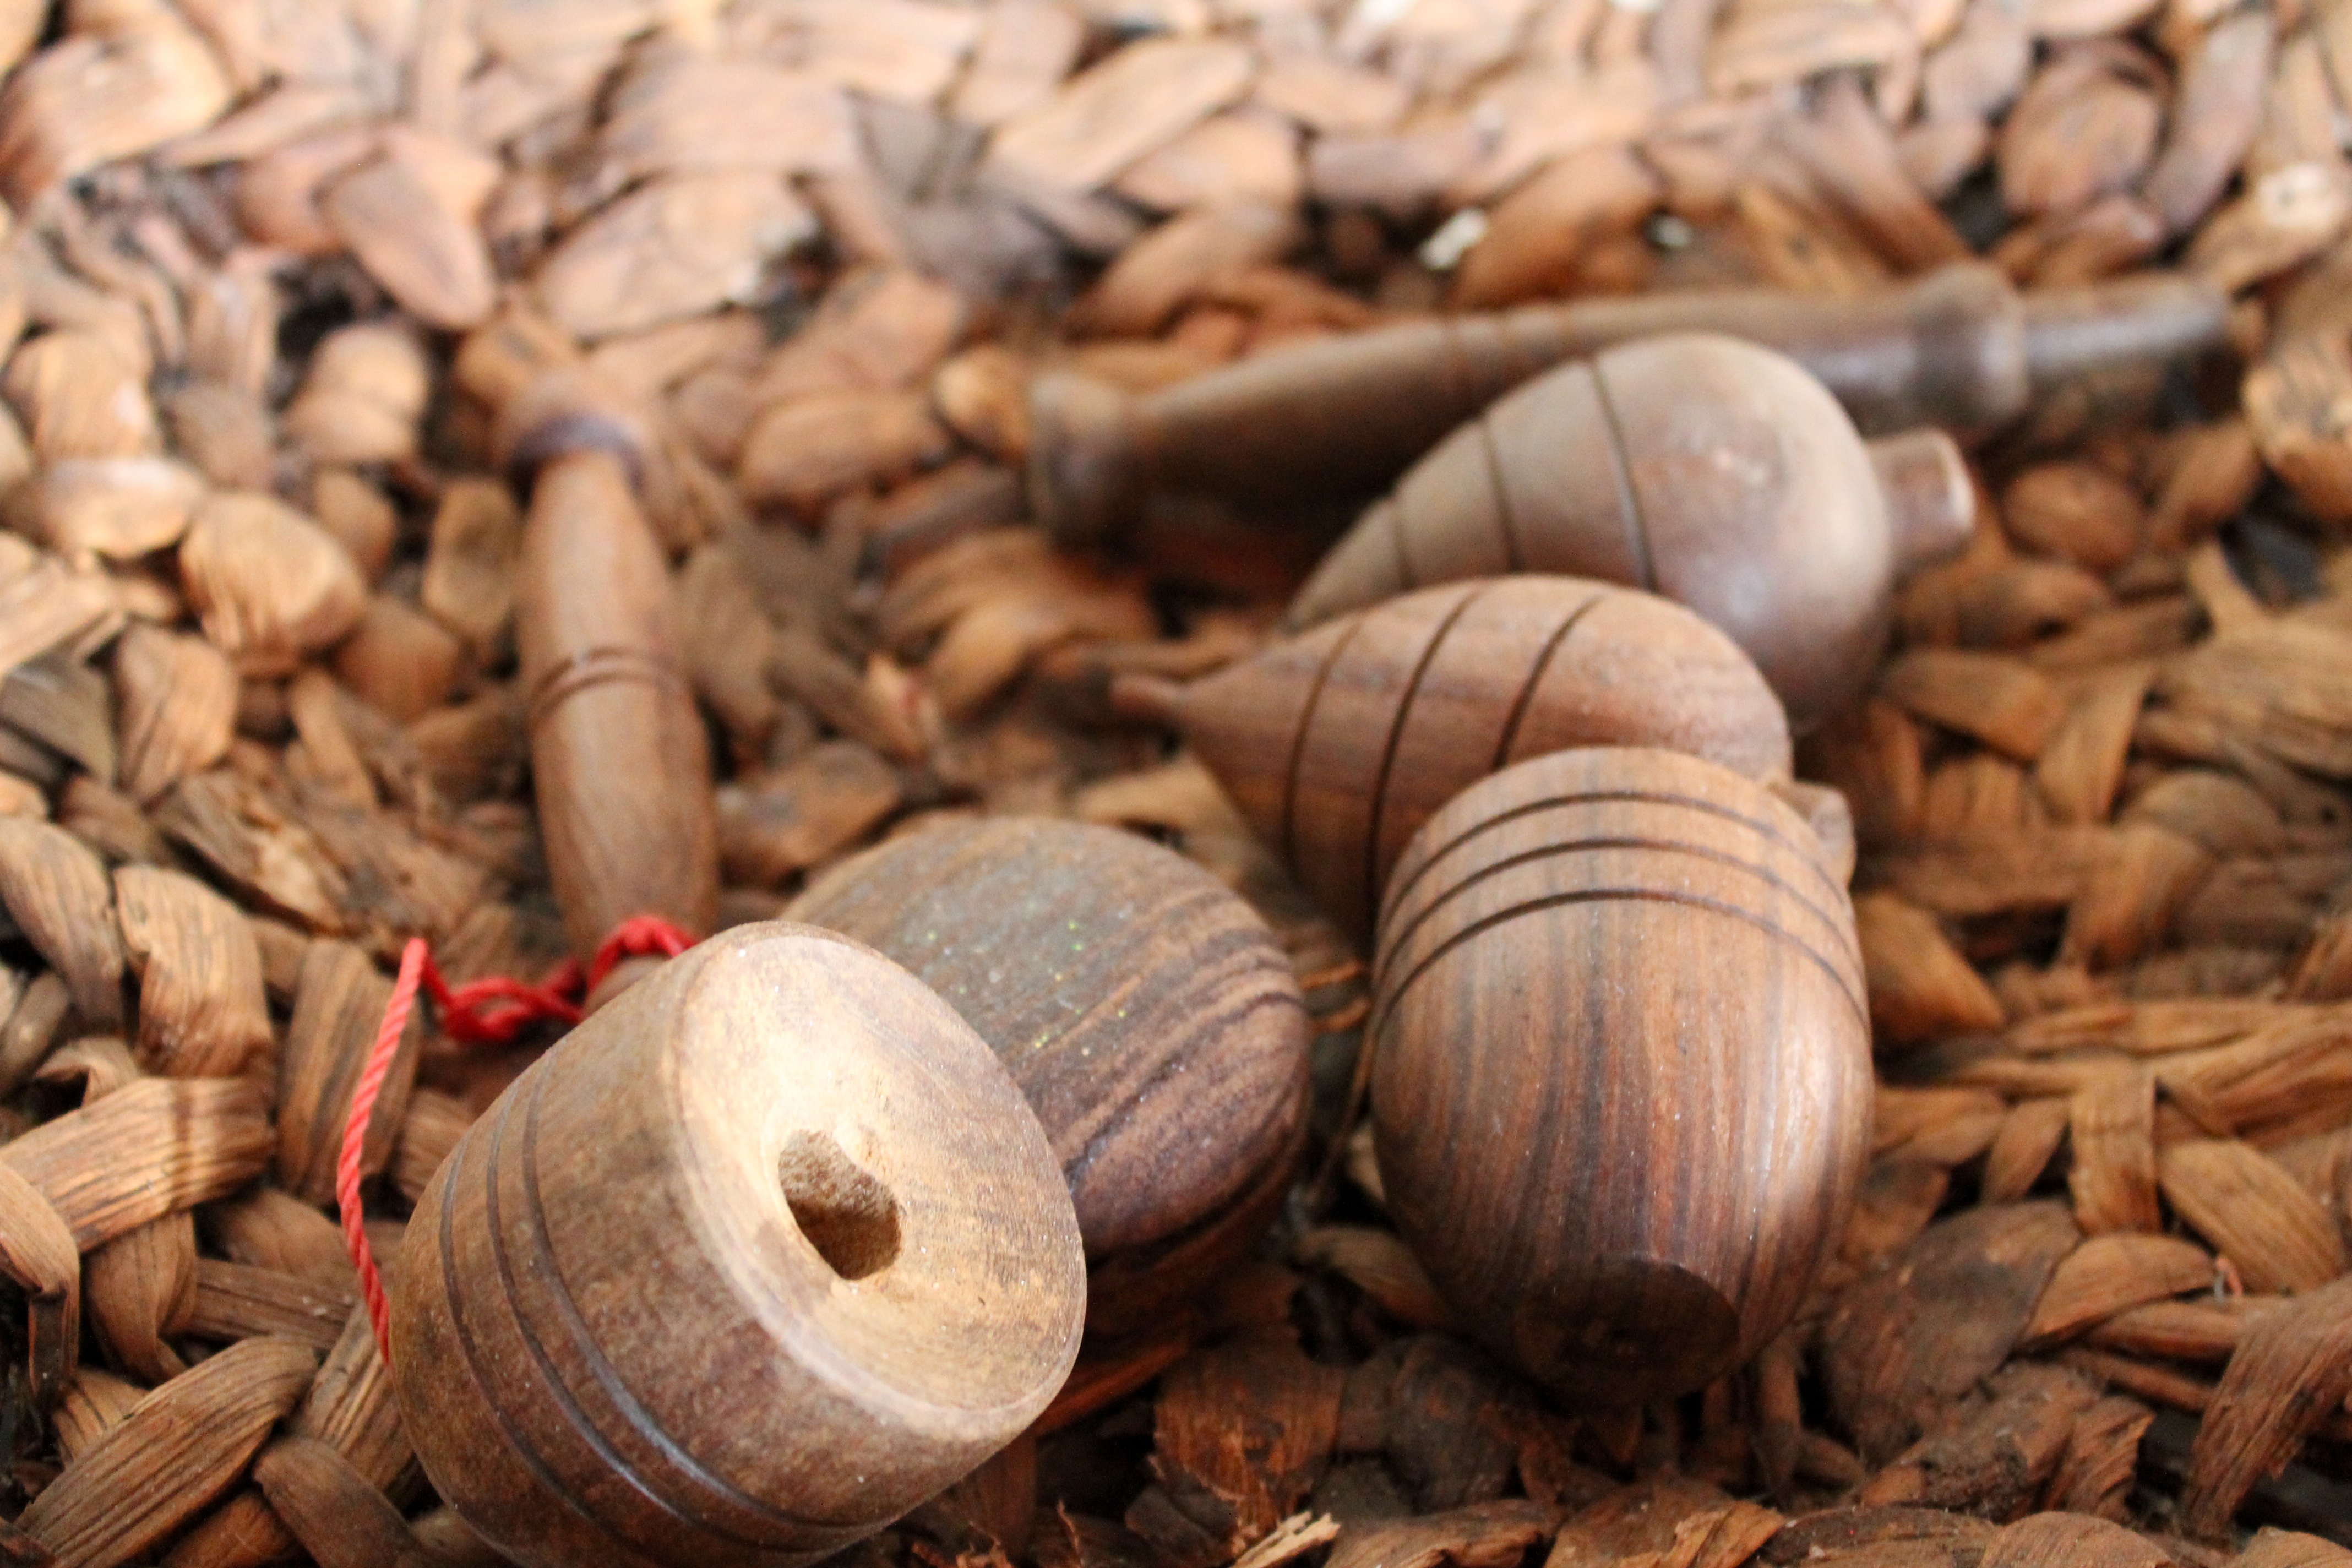 Indonesian gasing (spinning tops)